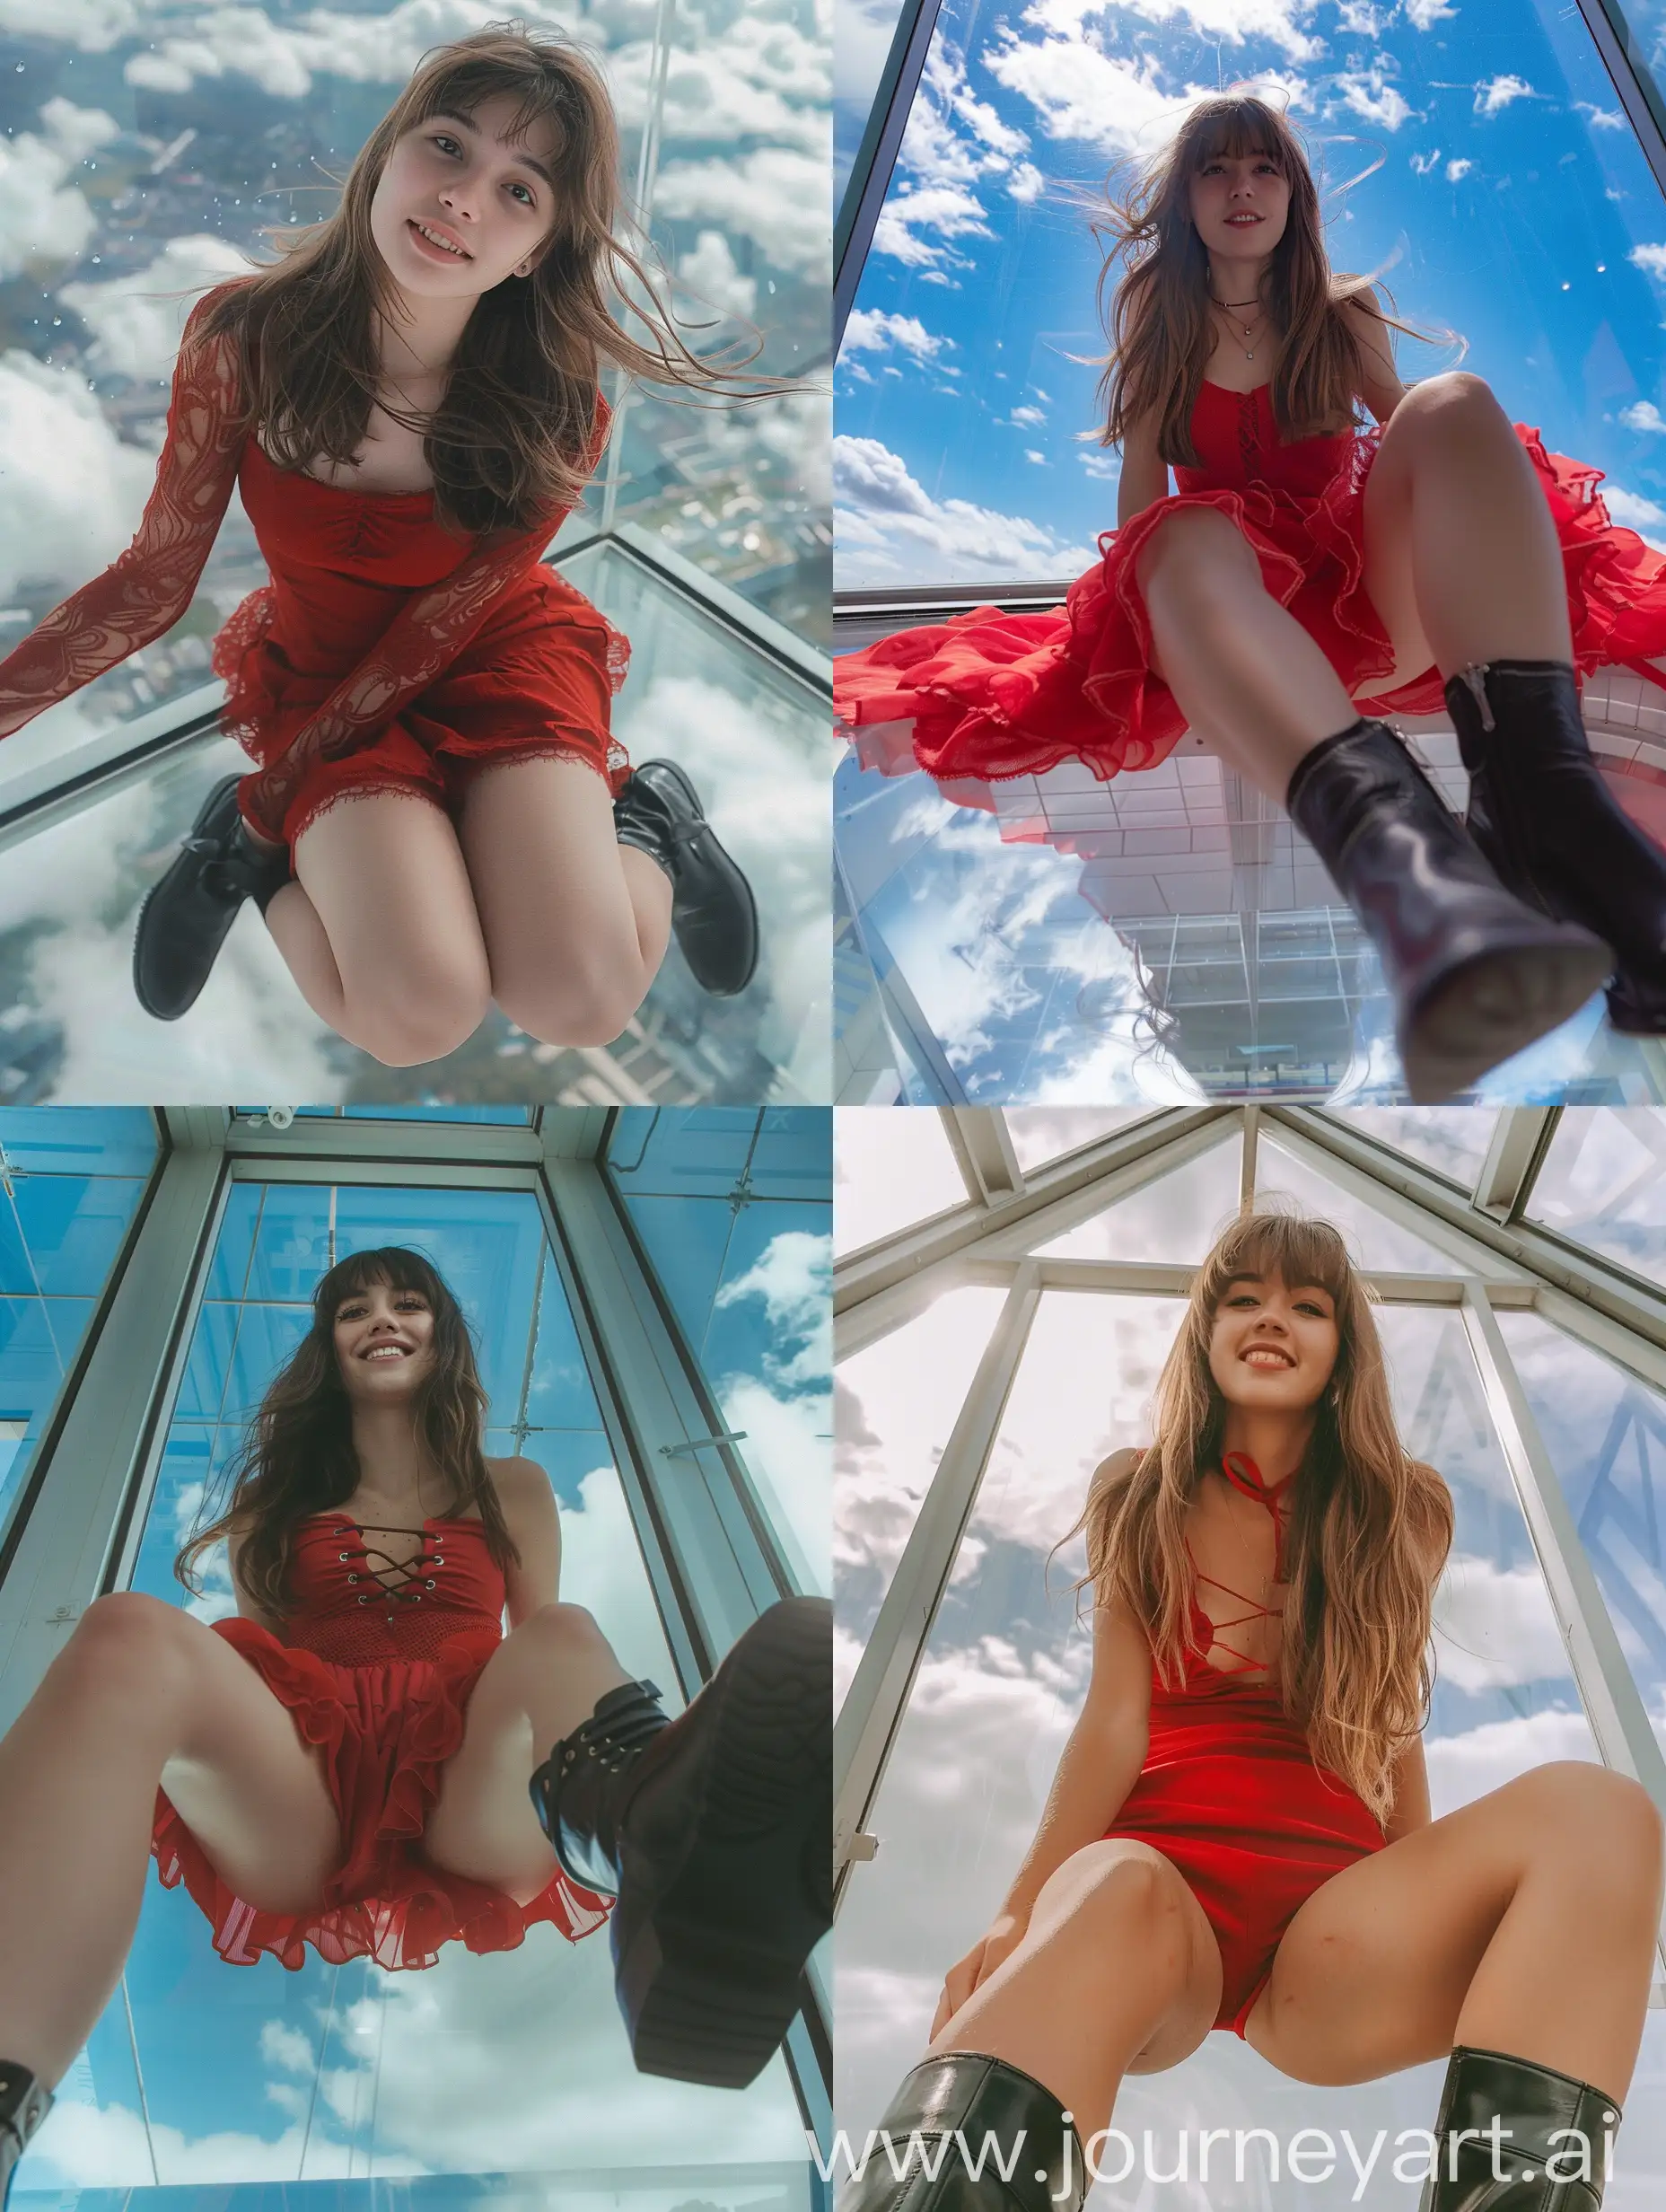 Young-Woman-in-Red-Dress-Taking-Natural-Selfie-Sitting-on-Glass